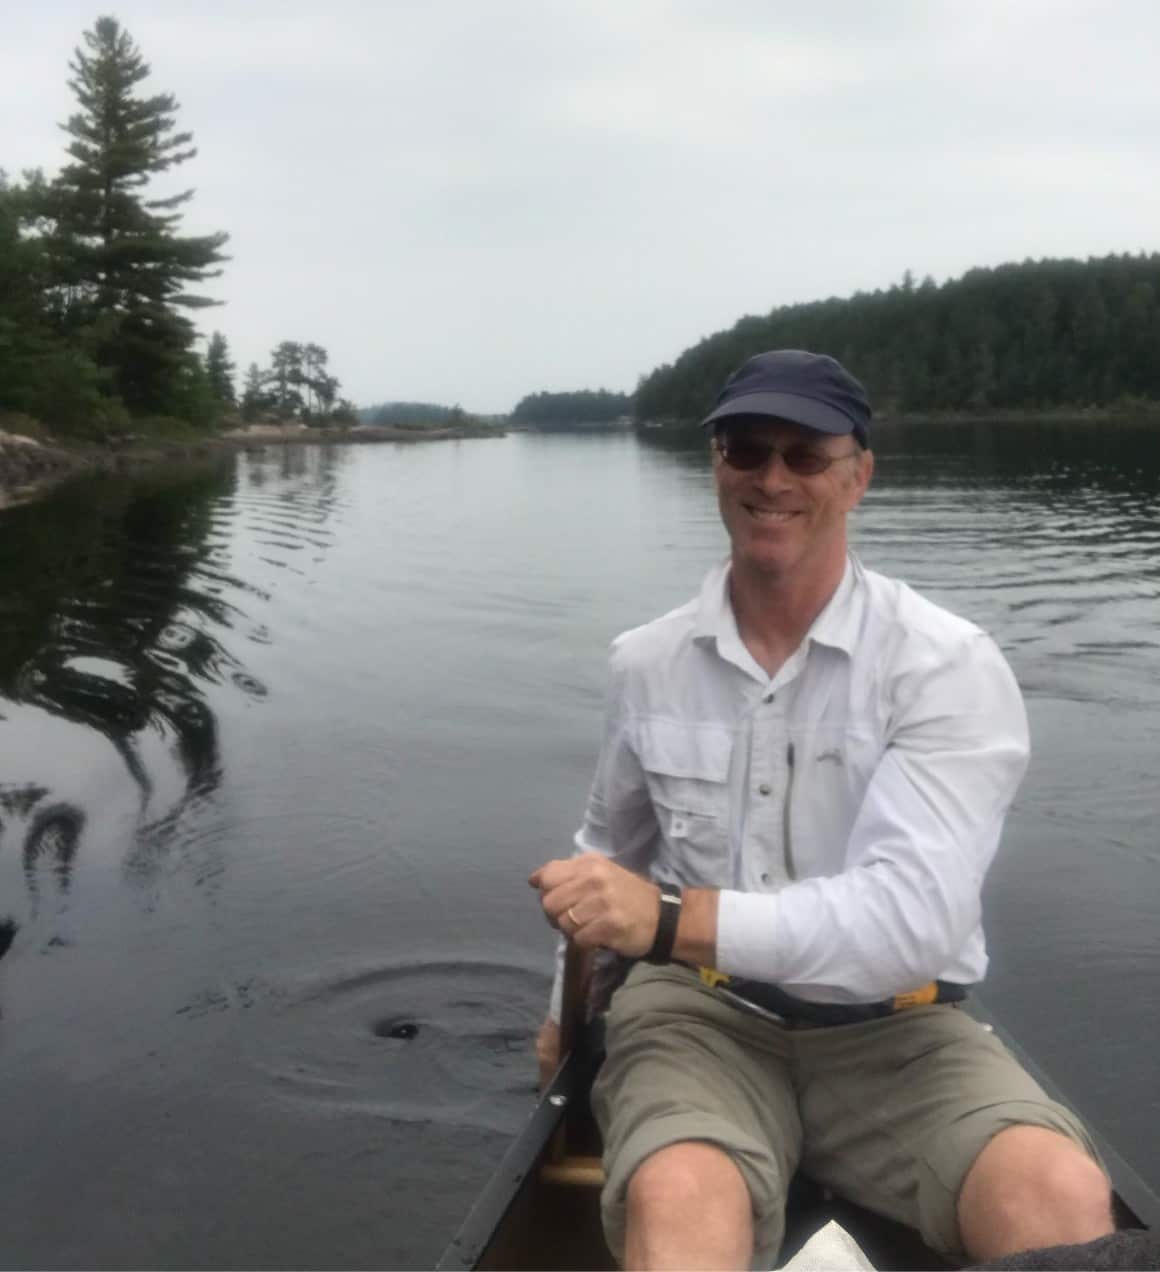 Duluth Man Died in His Favorite Place: The Boundary Waters